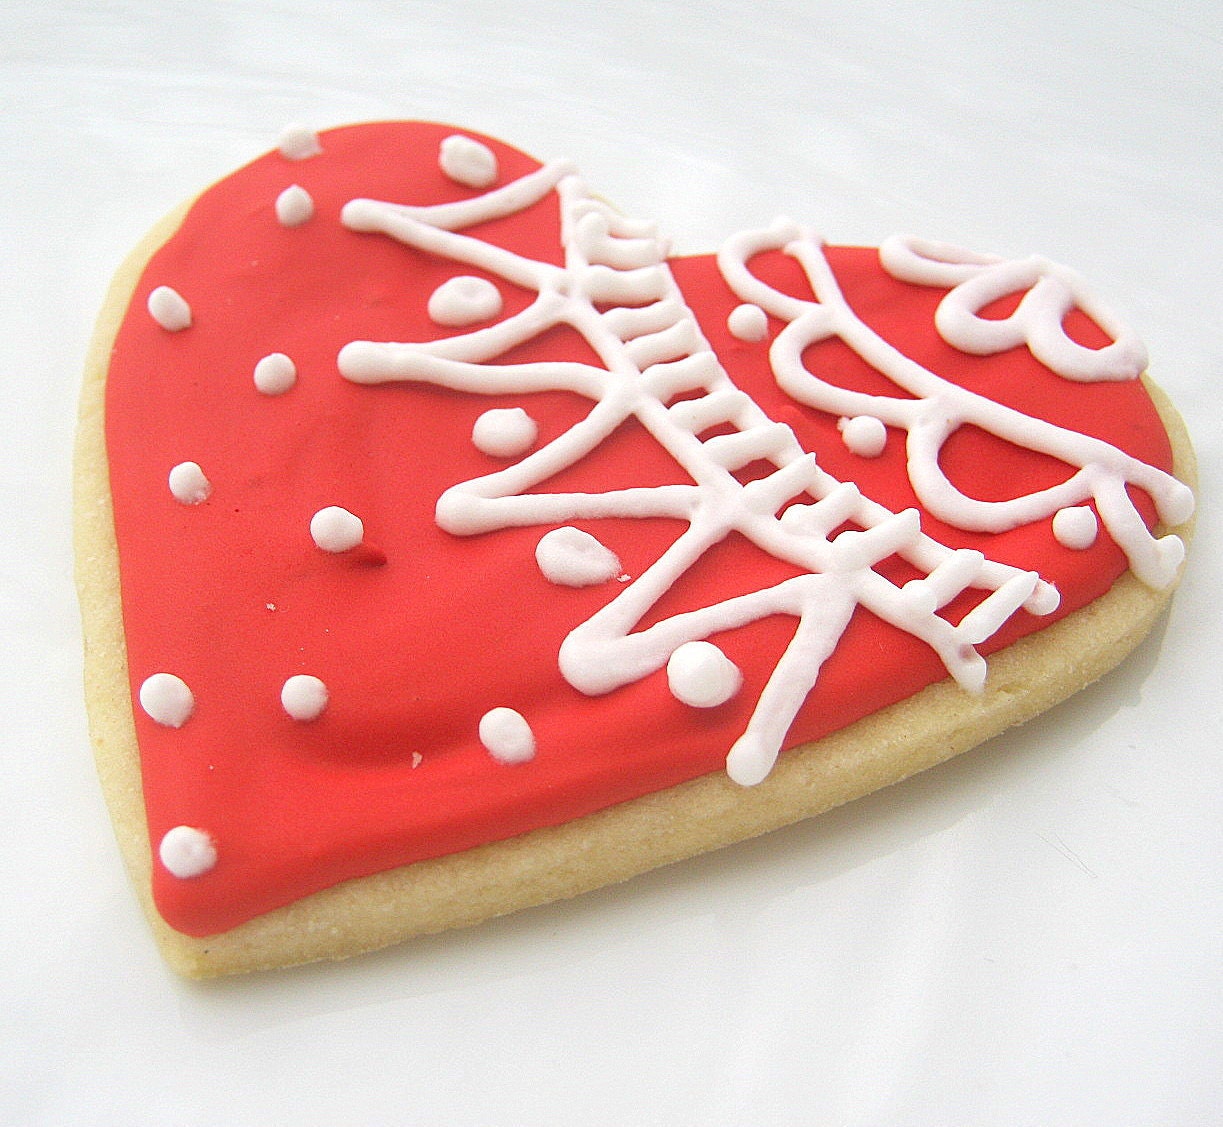 Vintage Lace Hearts 12 Count 3" Valentine Sugar Cookies All Natural Home Baked